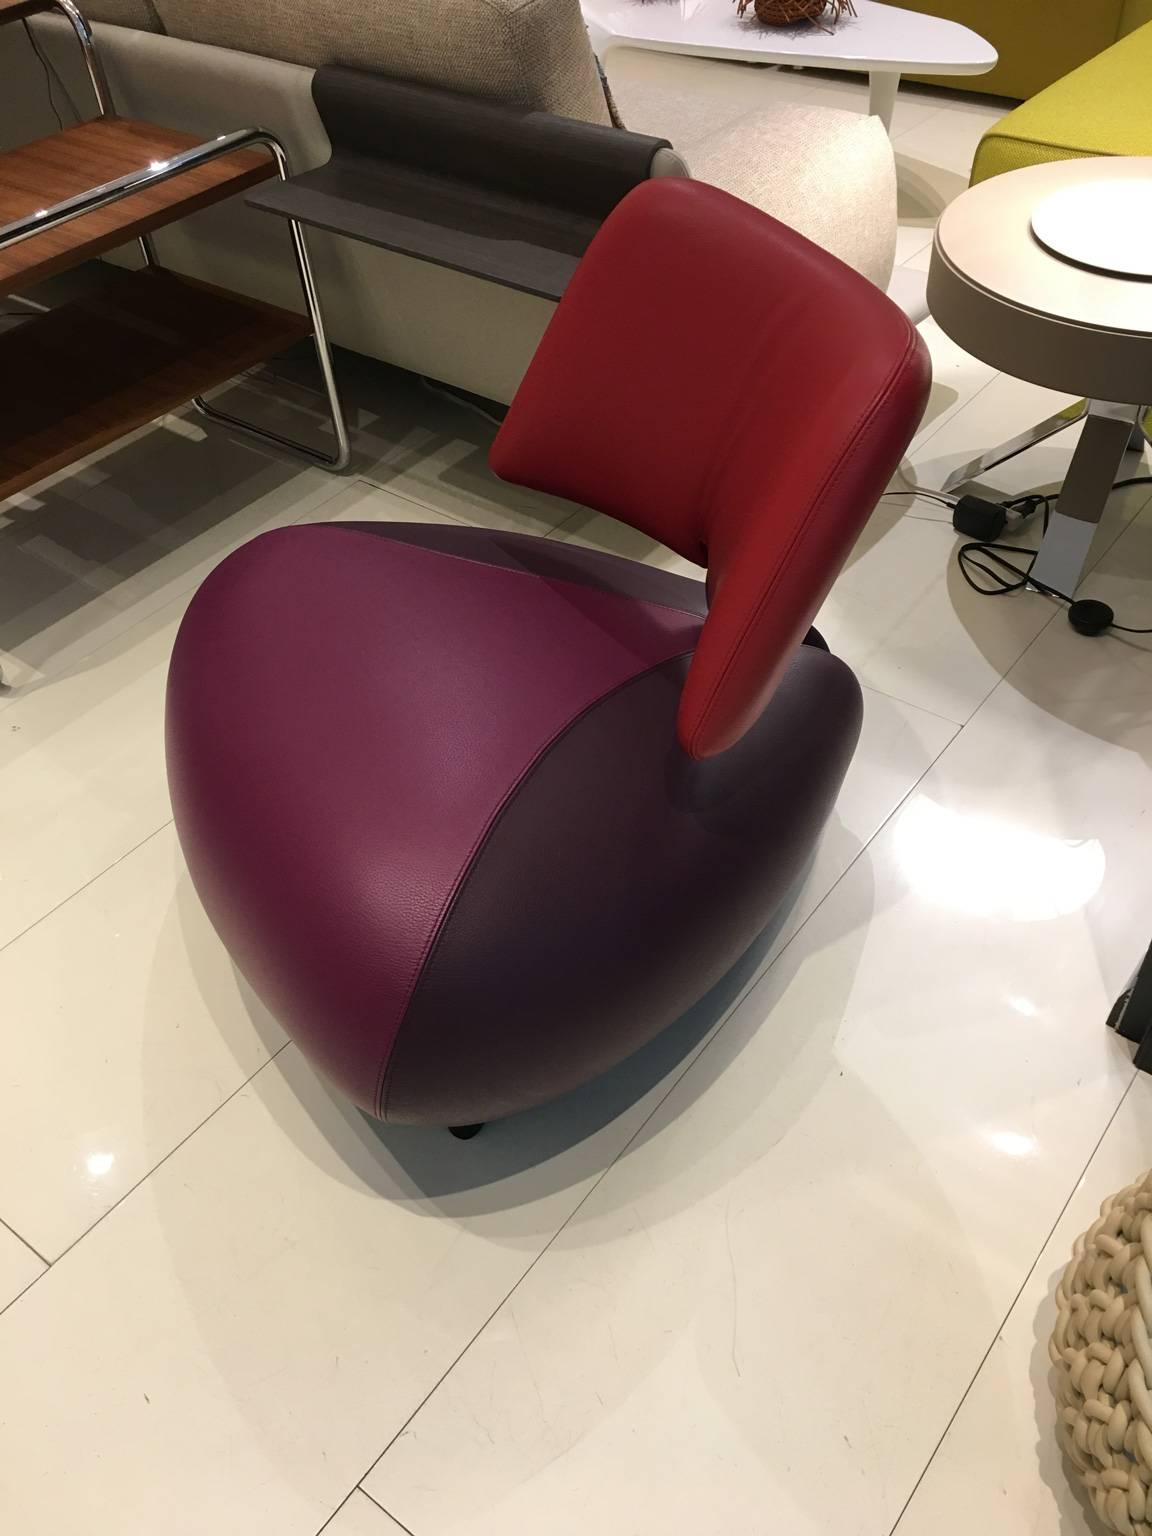 The icon of Leolux. The sitting ball specially designed in 1989 for the House of the Future is even now still as futuristic and humorous. And maybe so successful because of that. Pallone is personality, the perfect eyecatcher for distinctive